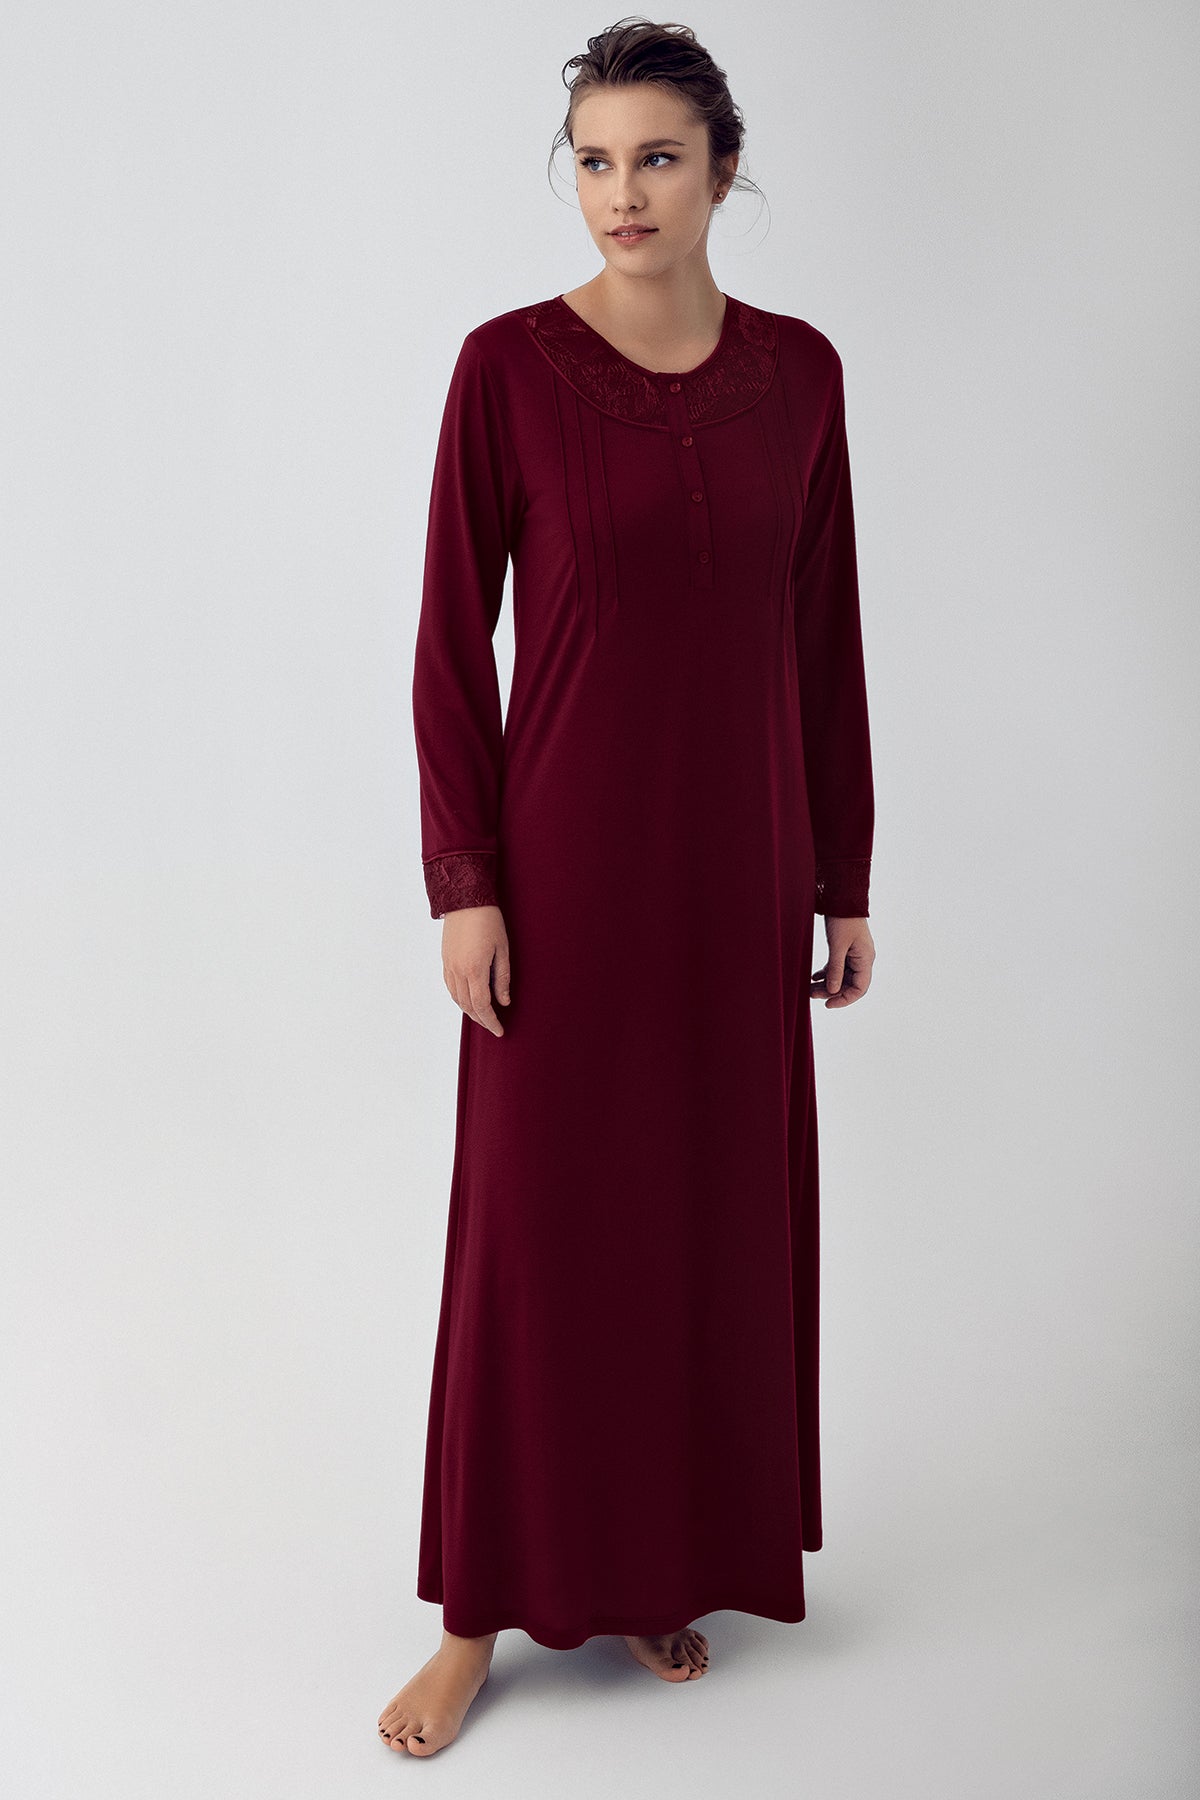 Shopymommy 16104 Lace Sleeve Long Maternity & Nursing Nightgown Claret Red